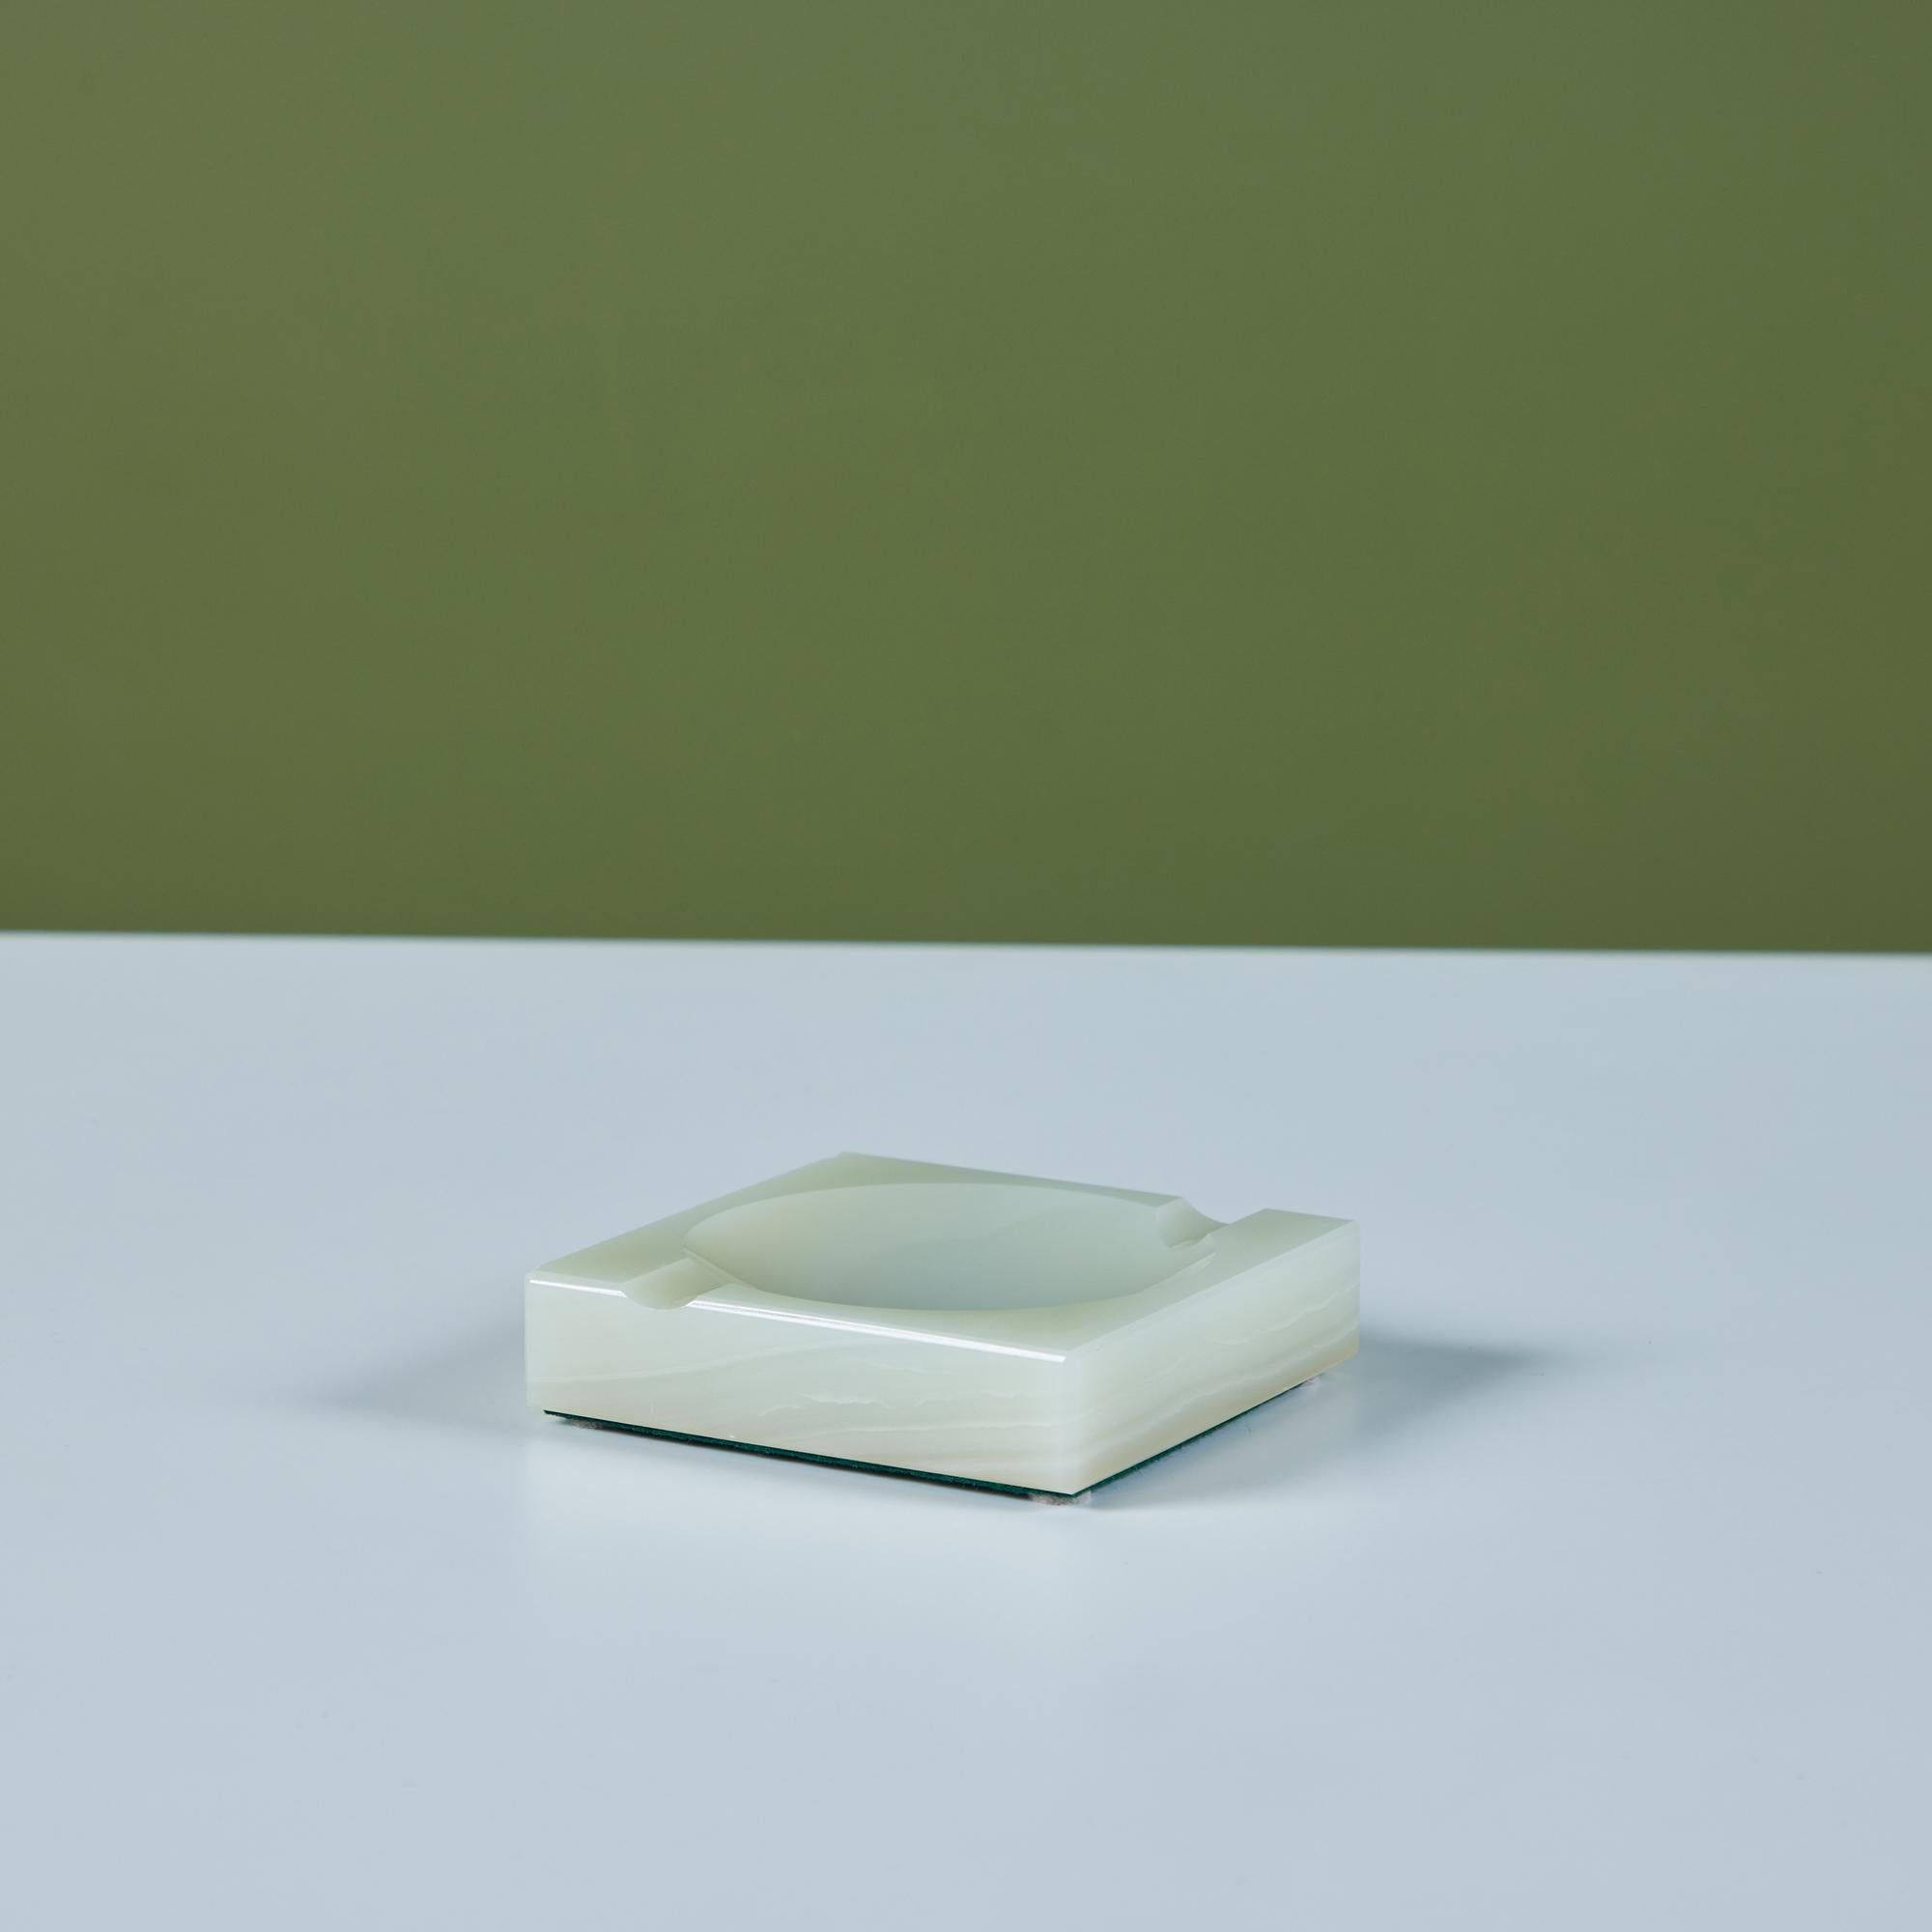 Polished square onyx ashtray features a soft green color with light cream veining around the sides. The piece has a circular dish center, and two cutouts for a cigarette. Though initially used as an ashtray, it can serve as a vide poche or